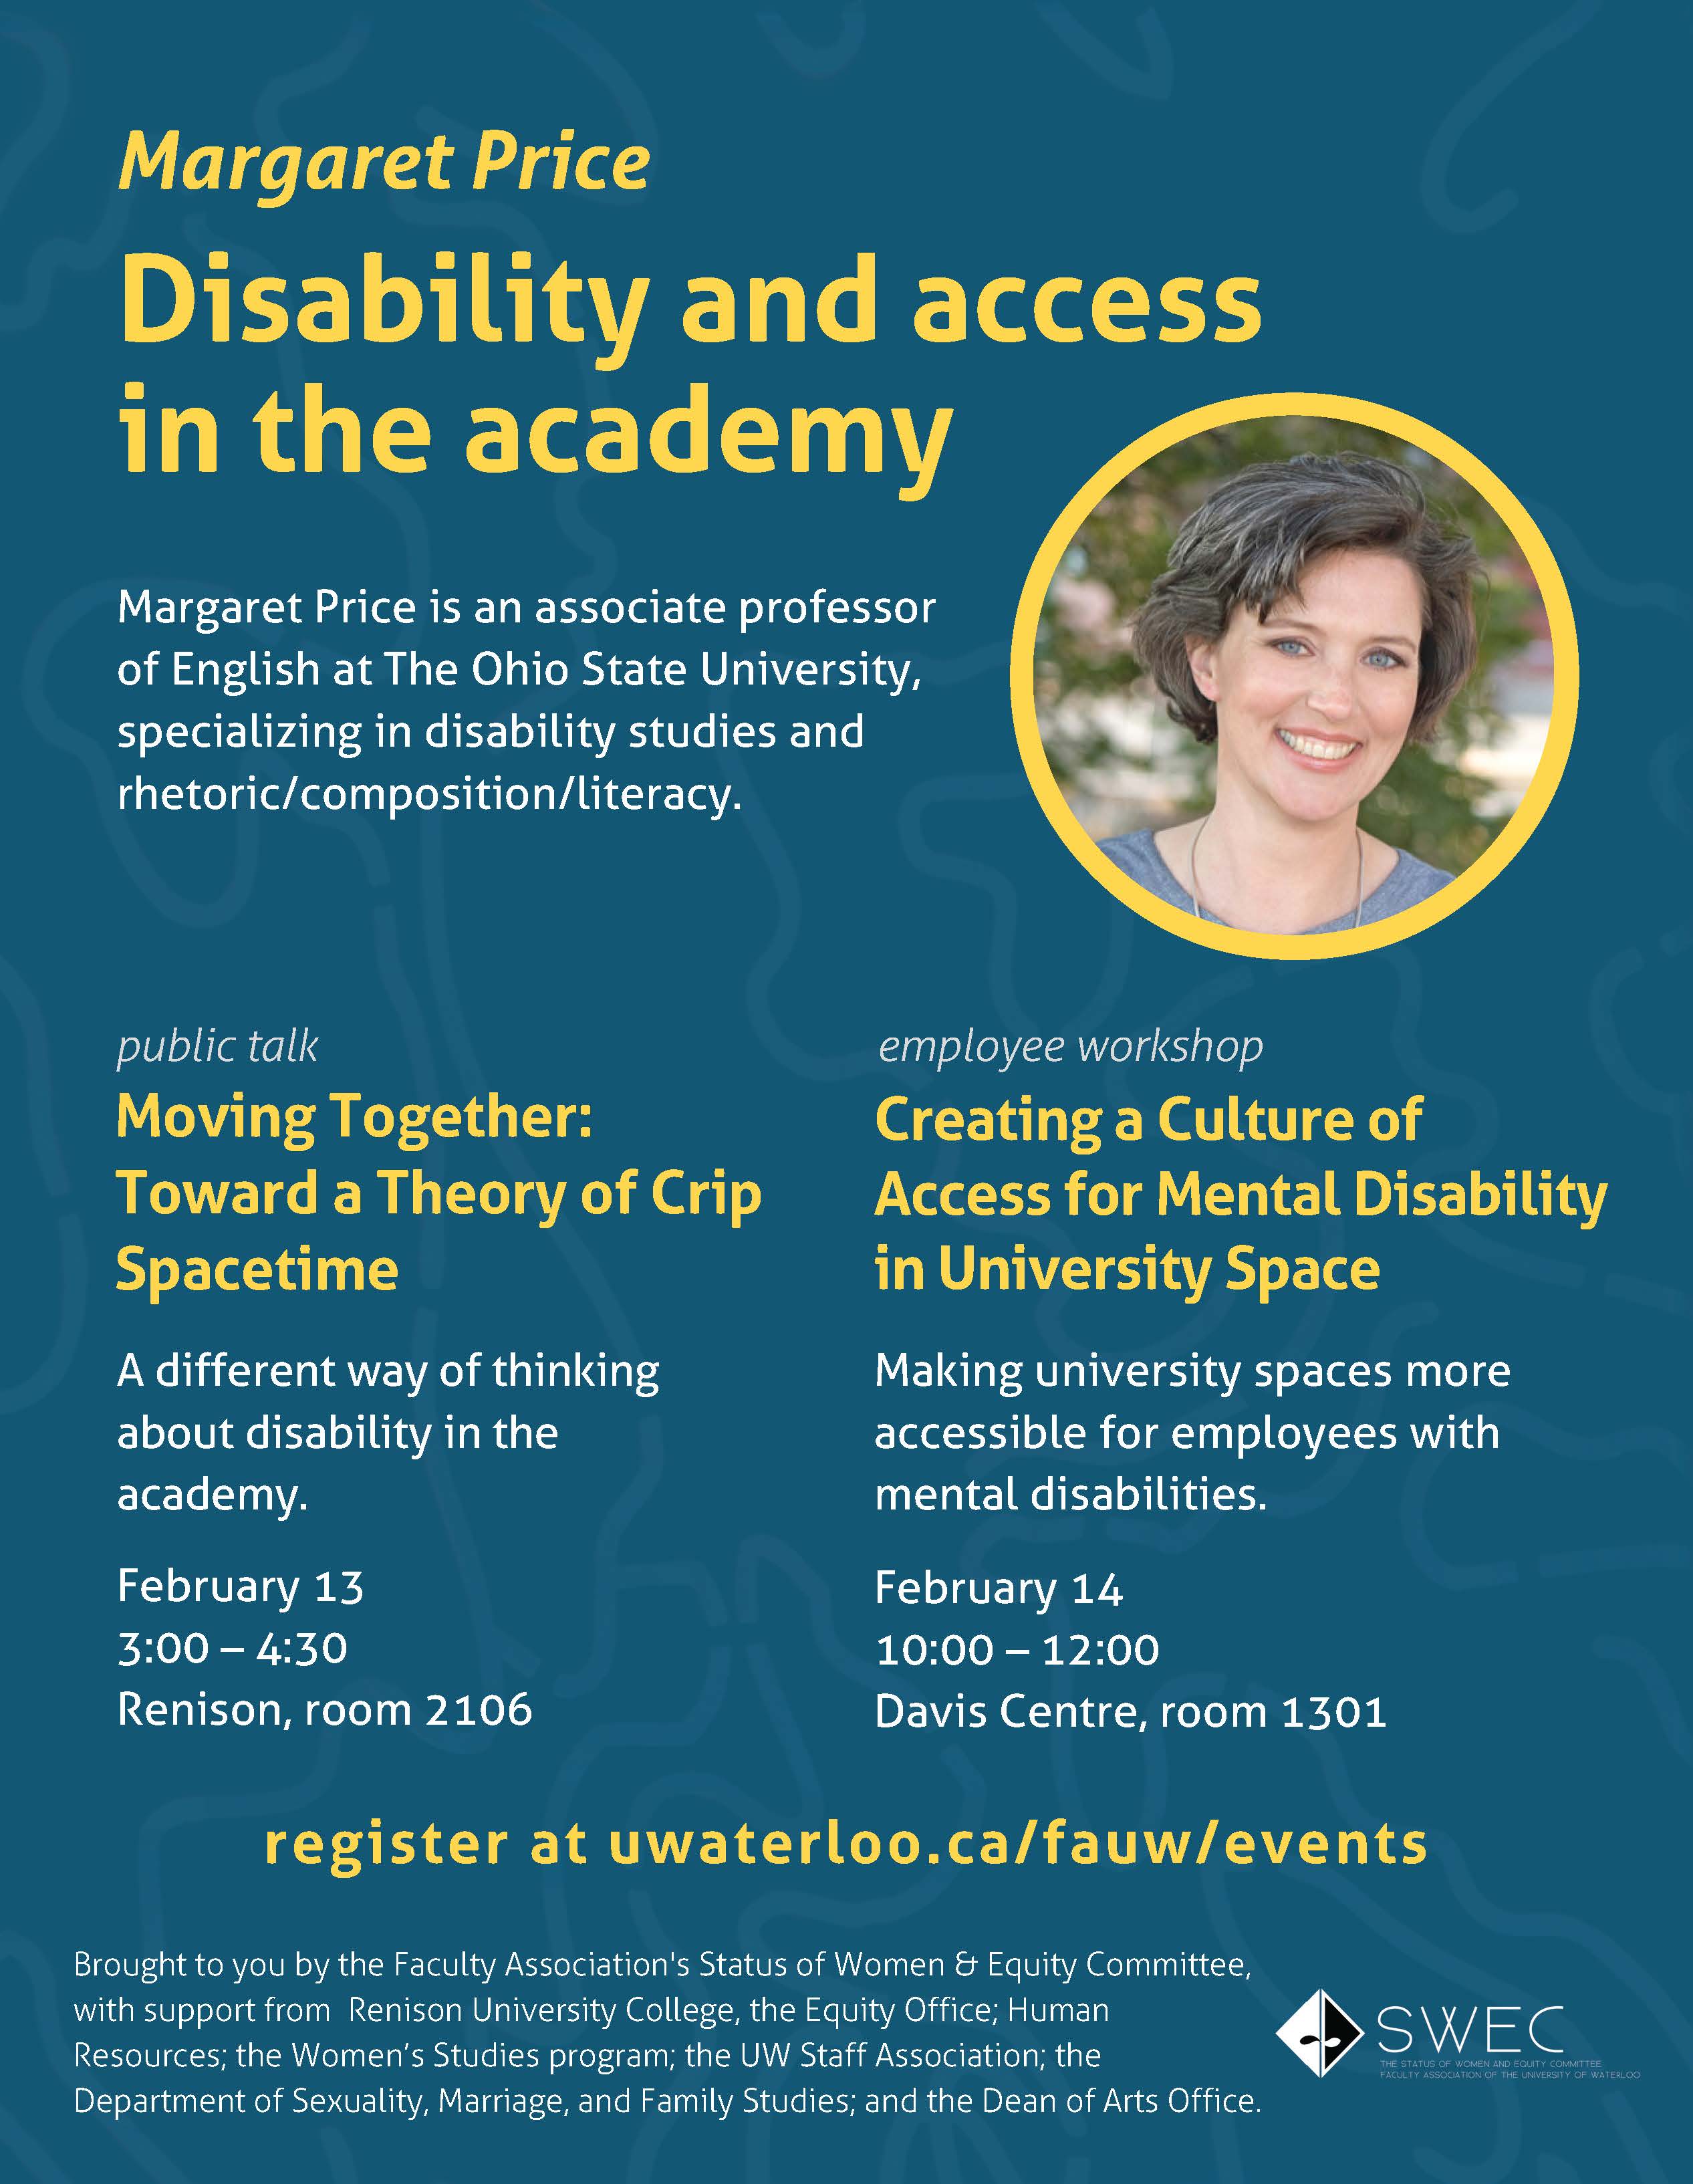 Disaility and access in the academy event flyer